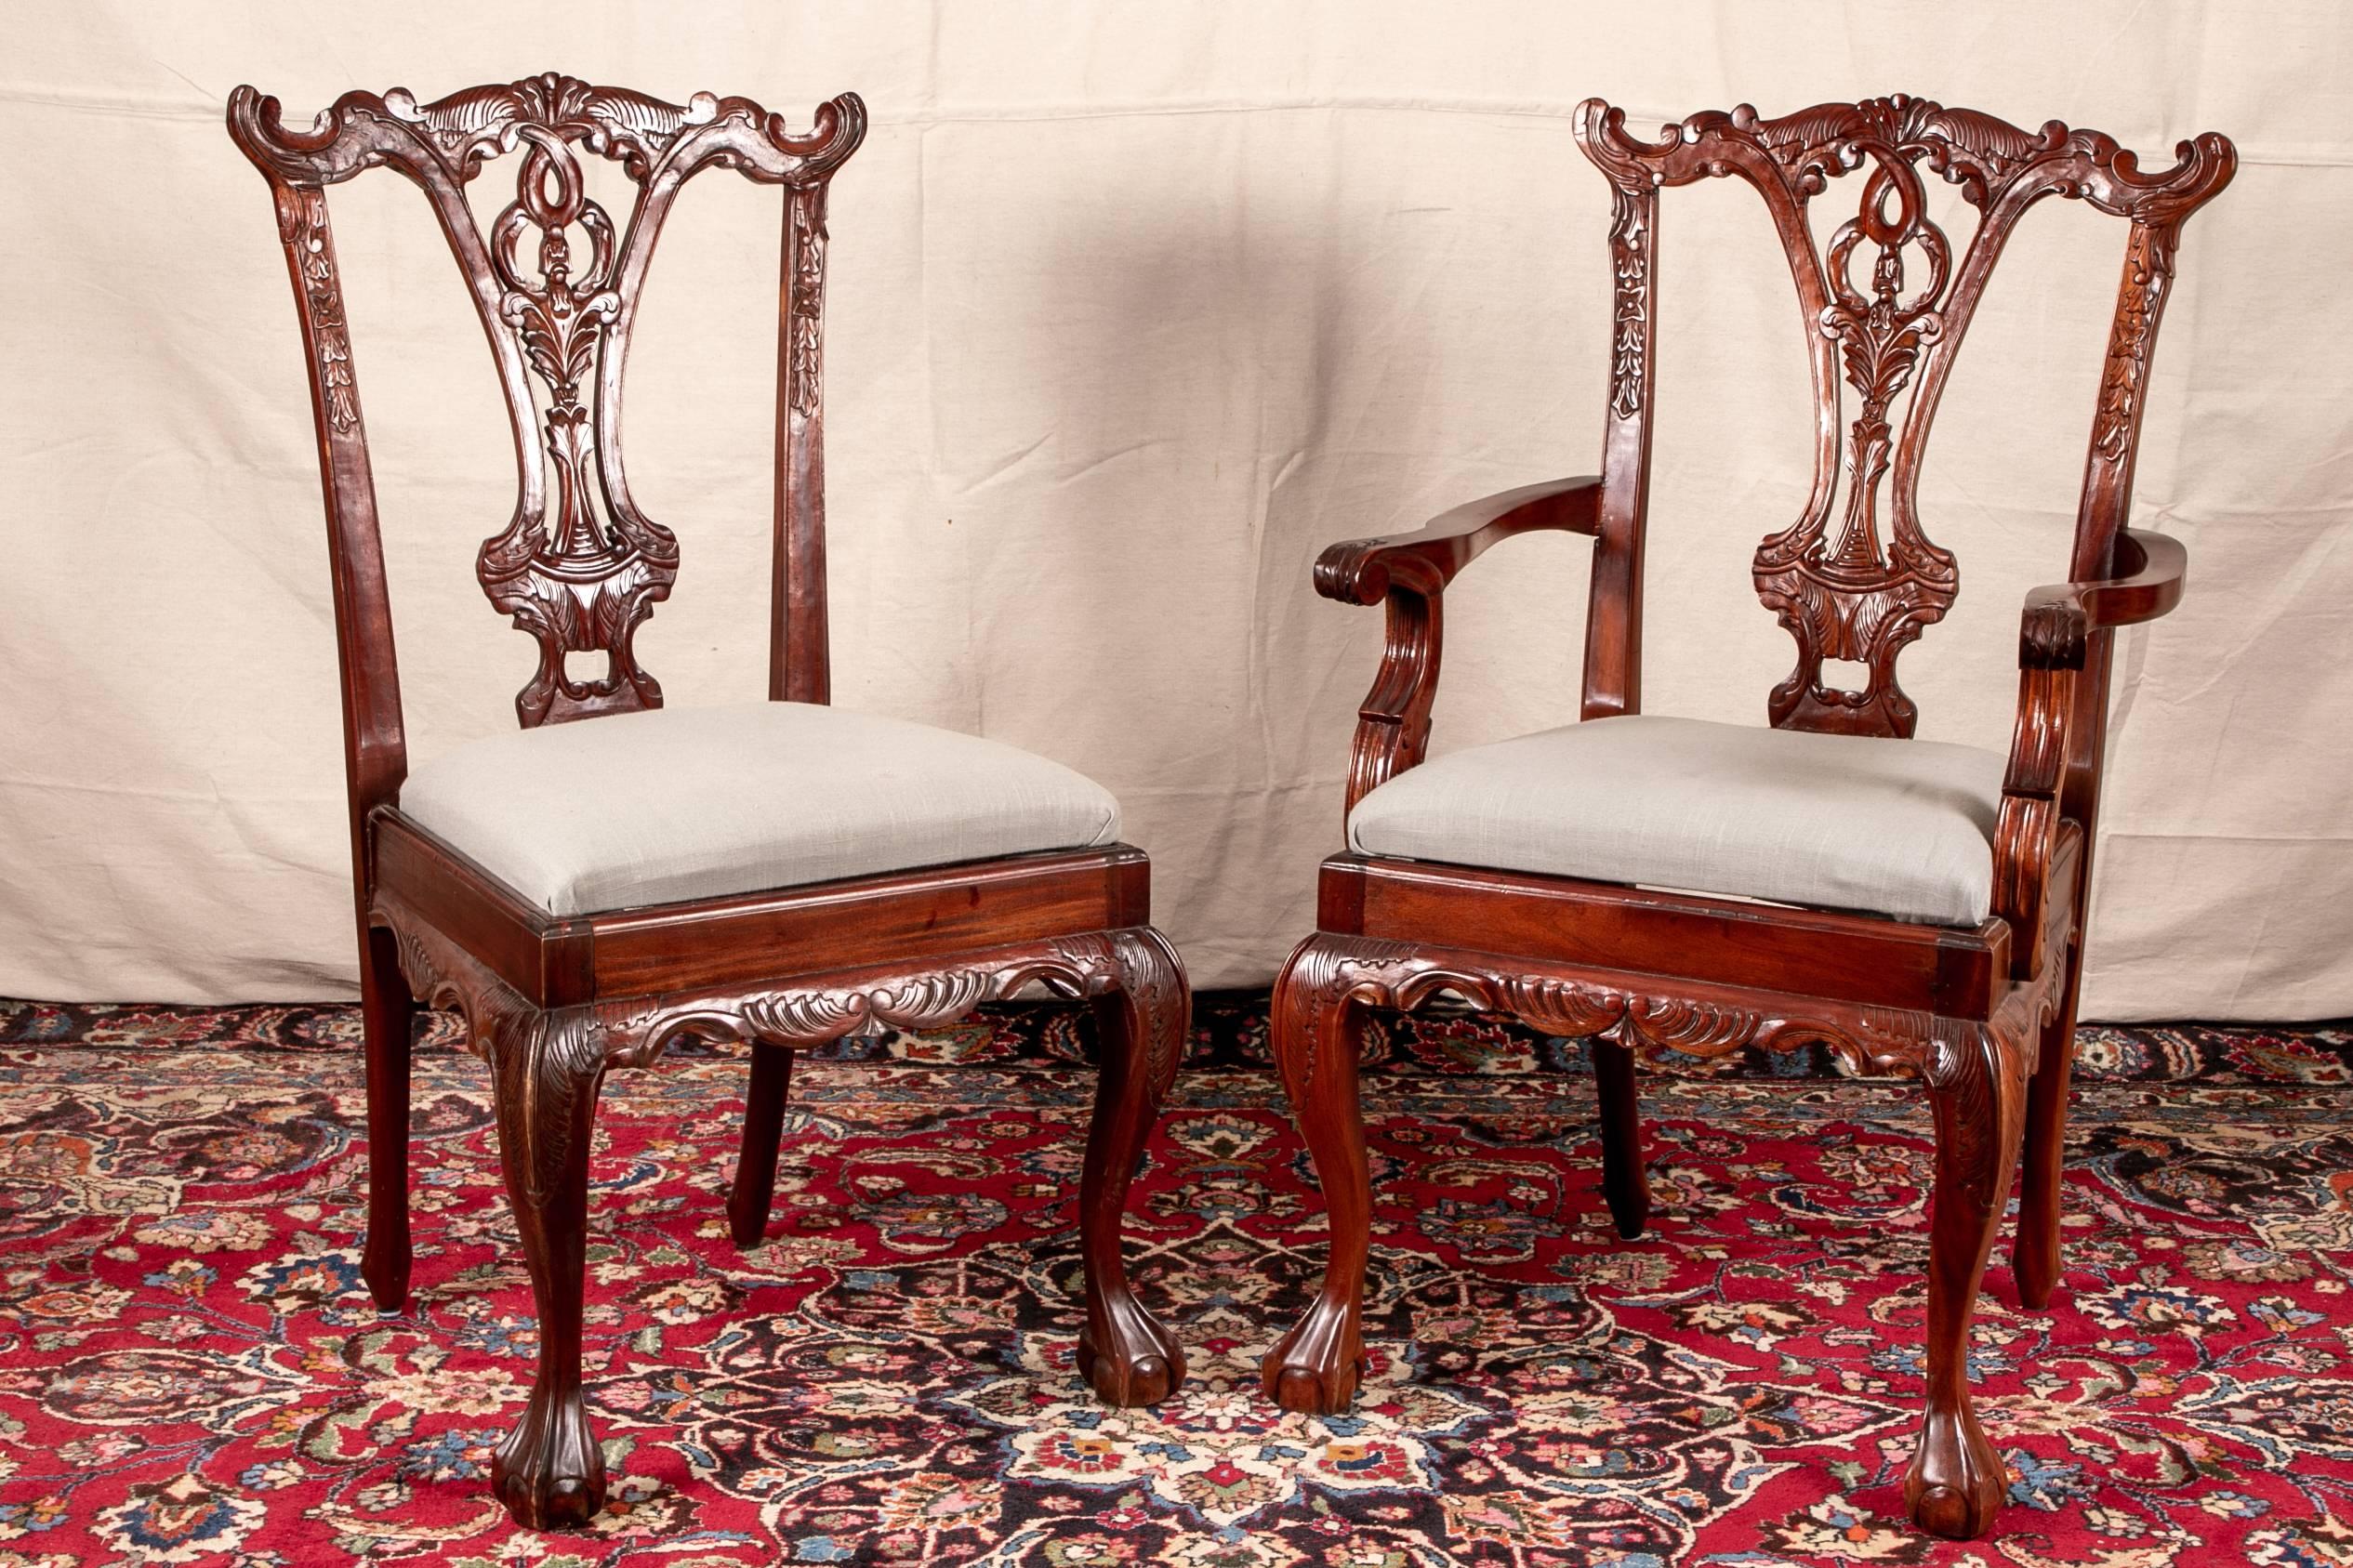 Set of eight Georgian style carved mahogany dining chairs, two arm and six side chairs. Carved mahogany with leafy scrolled crest rails, openwork leafy splats, and carved leafy seat frames. Raised on cabriole legs in front with carved acanthus leaf